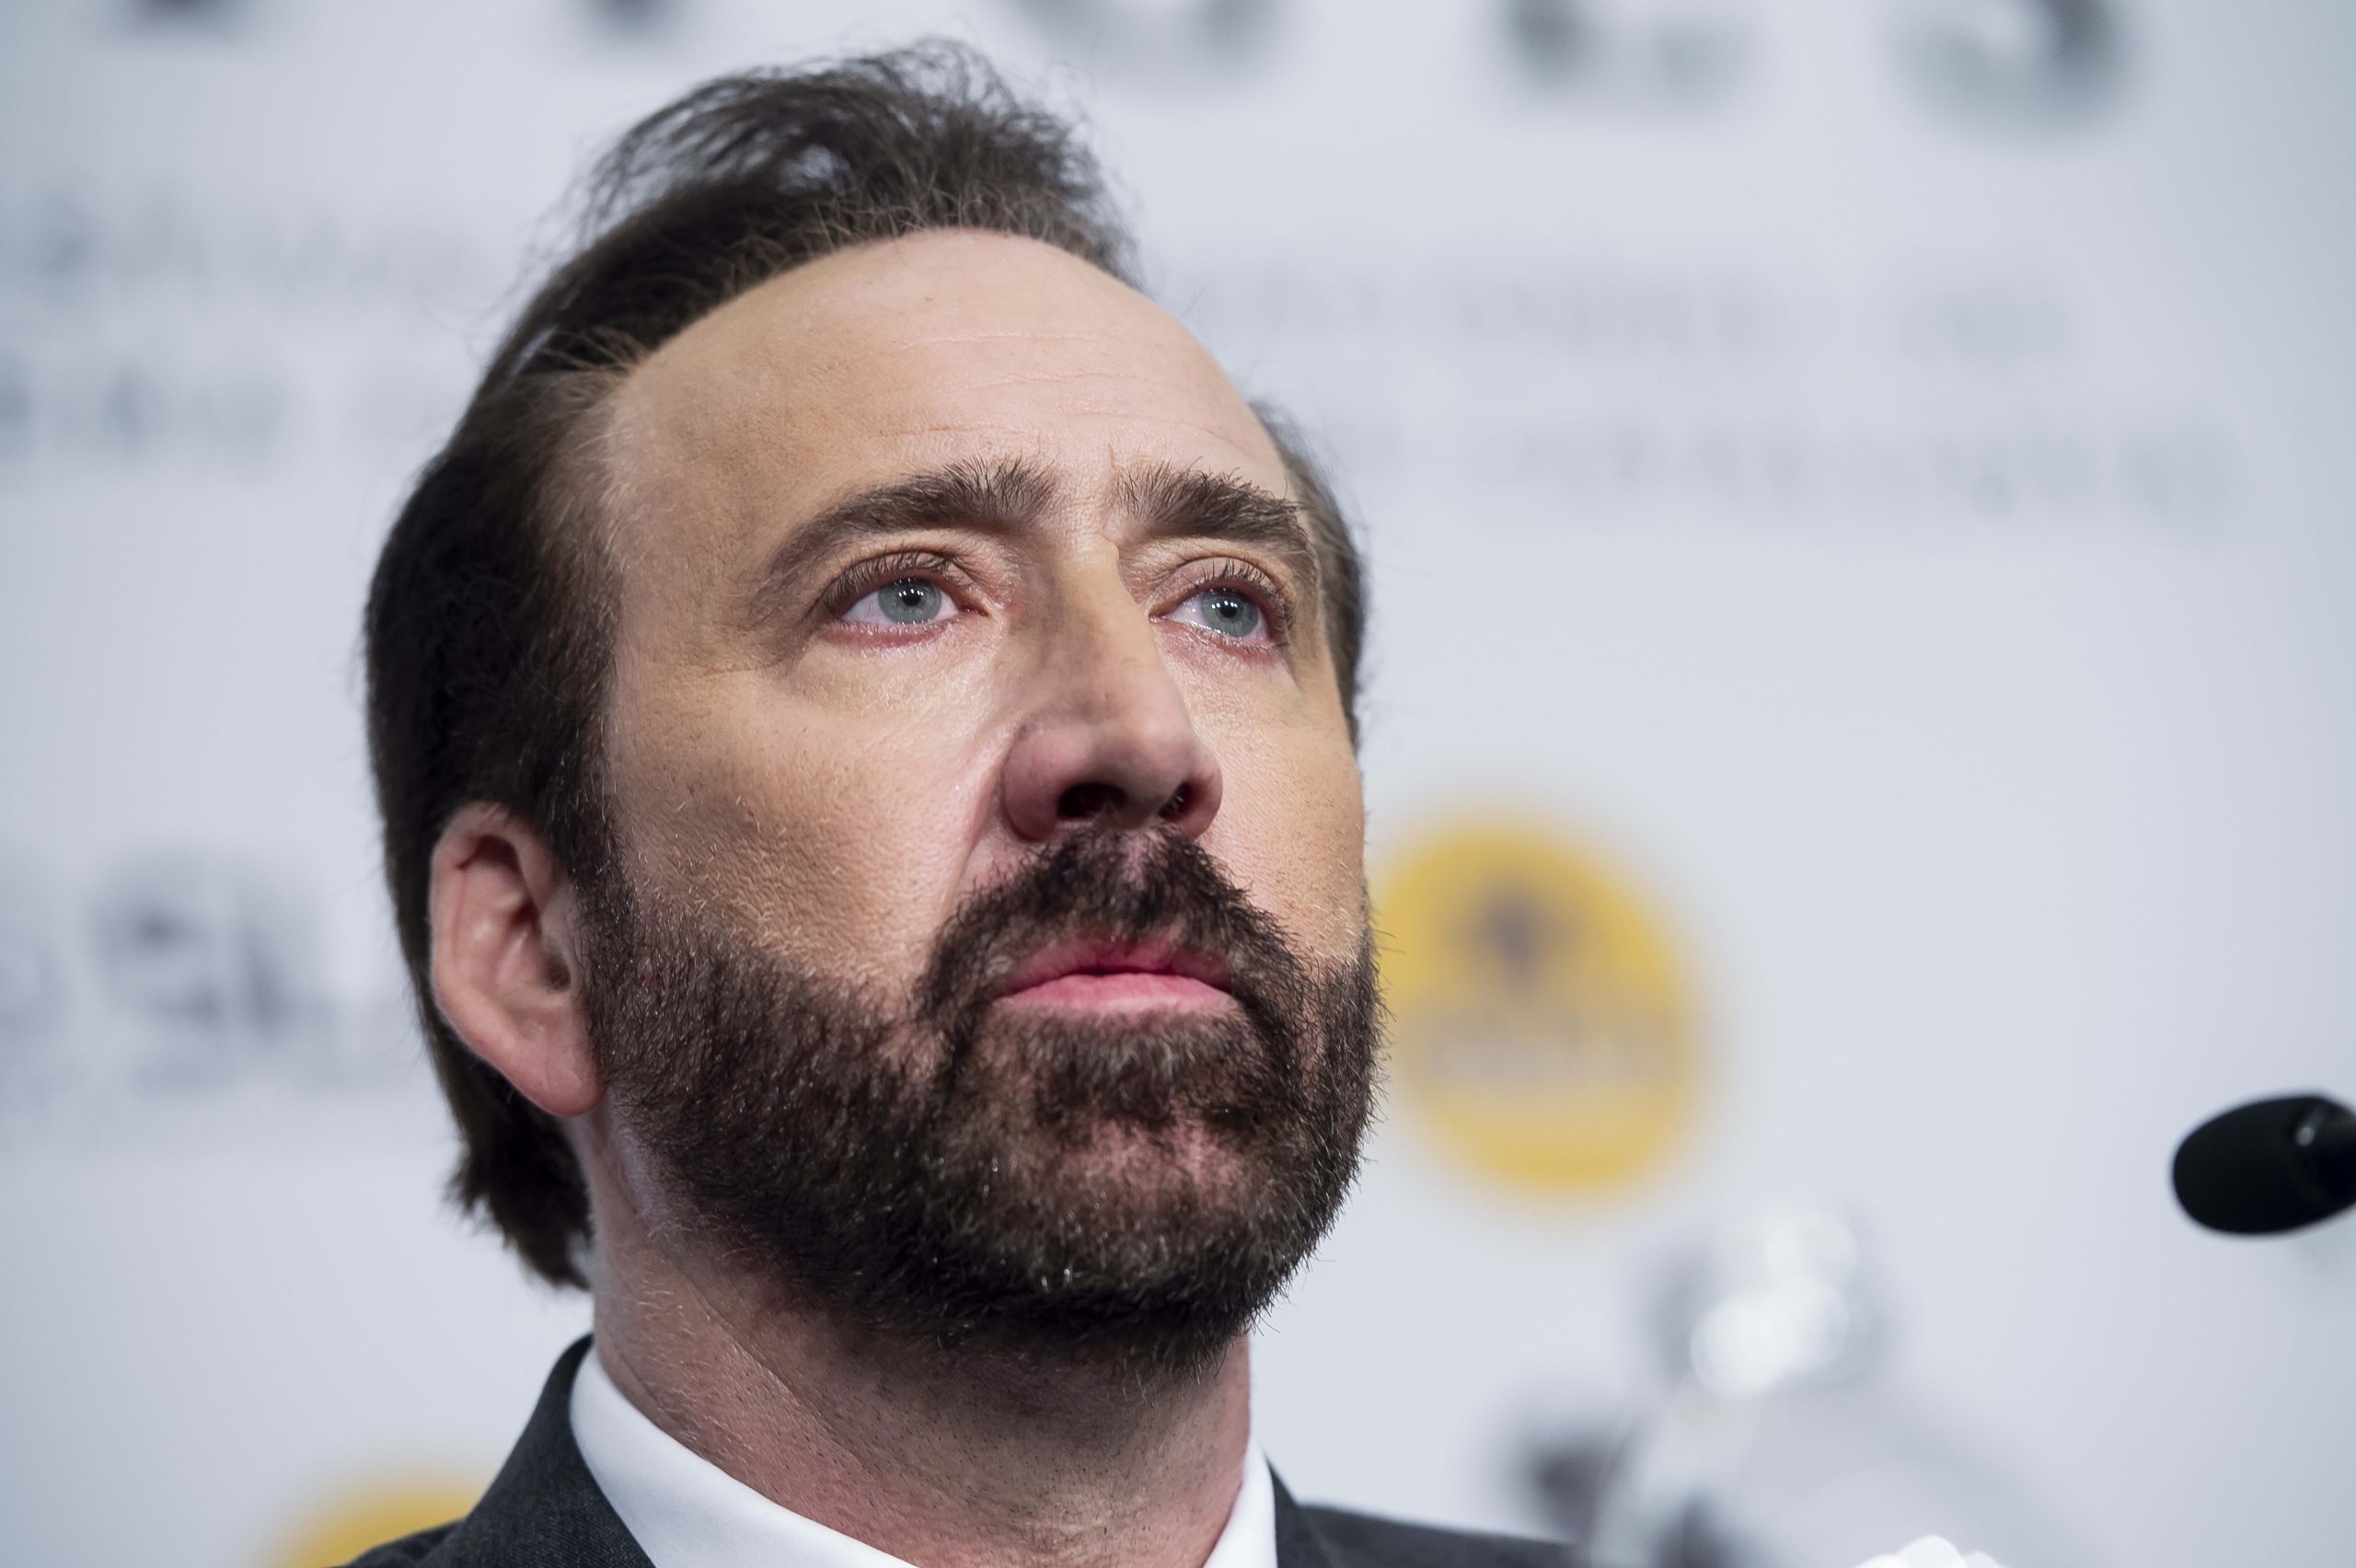 Nicolas Cage Wiki, Bio, Age, Net Worth, and Other Facts